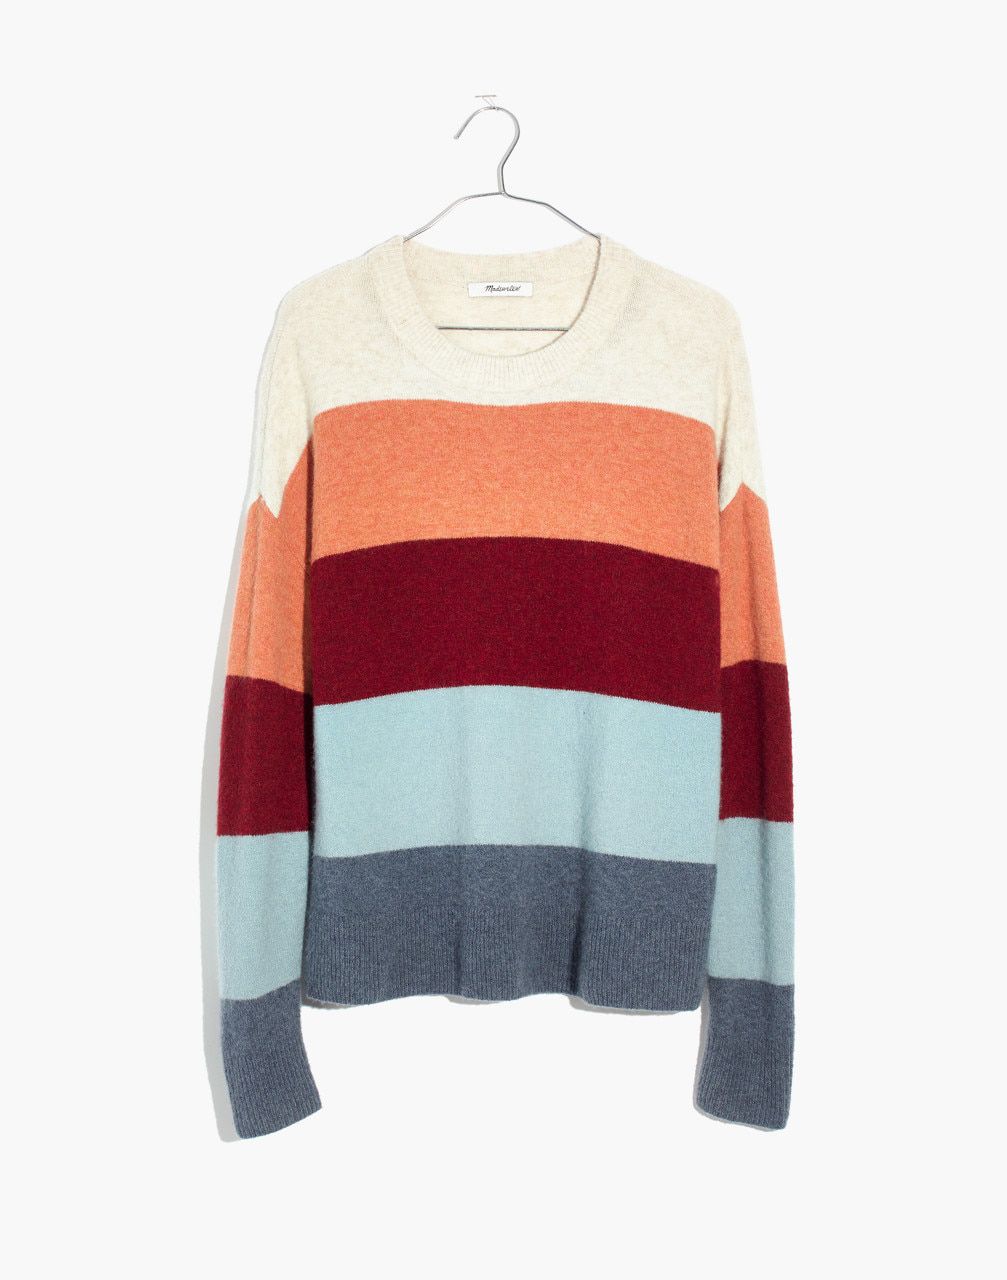 The Best Fall Sweaters to Buy Now | PEOPLE.com